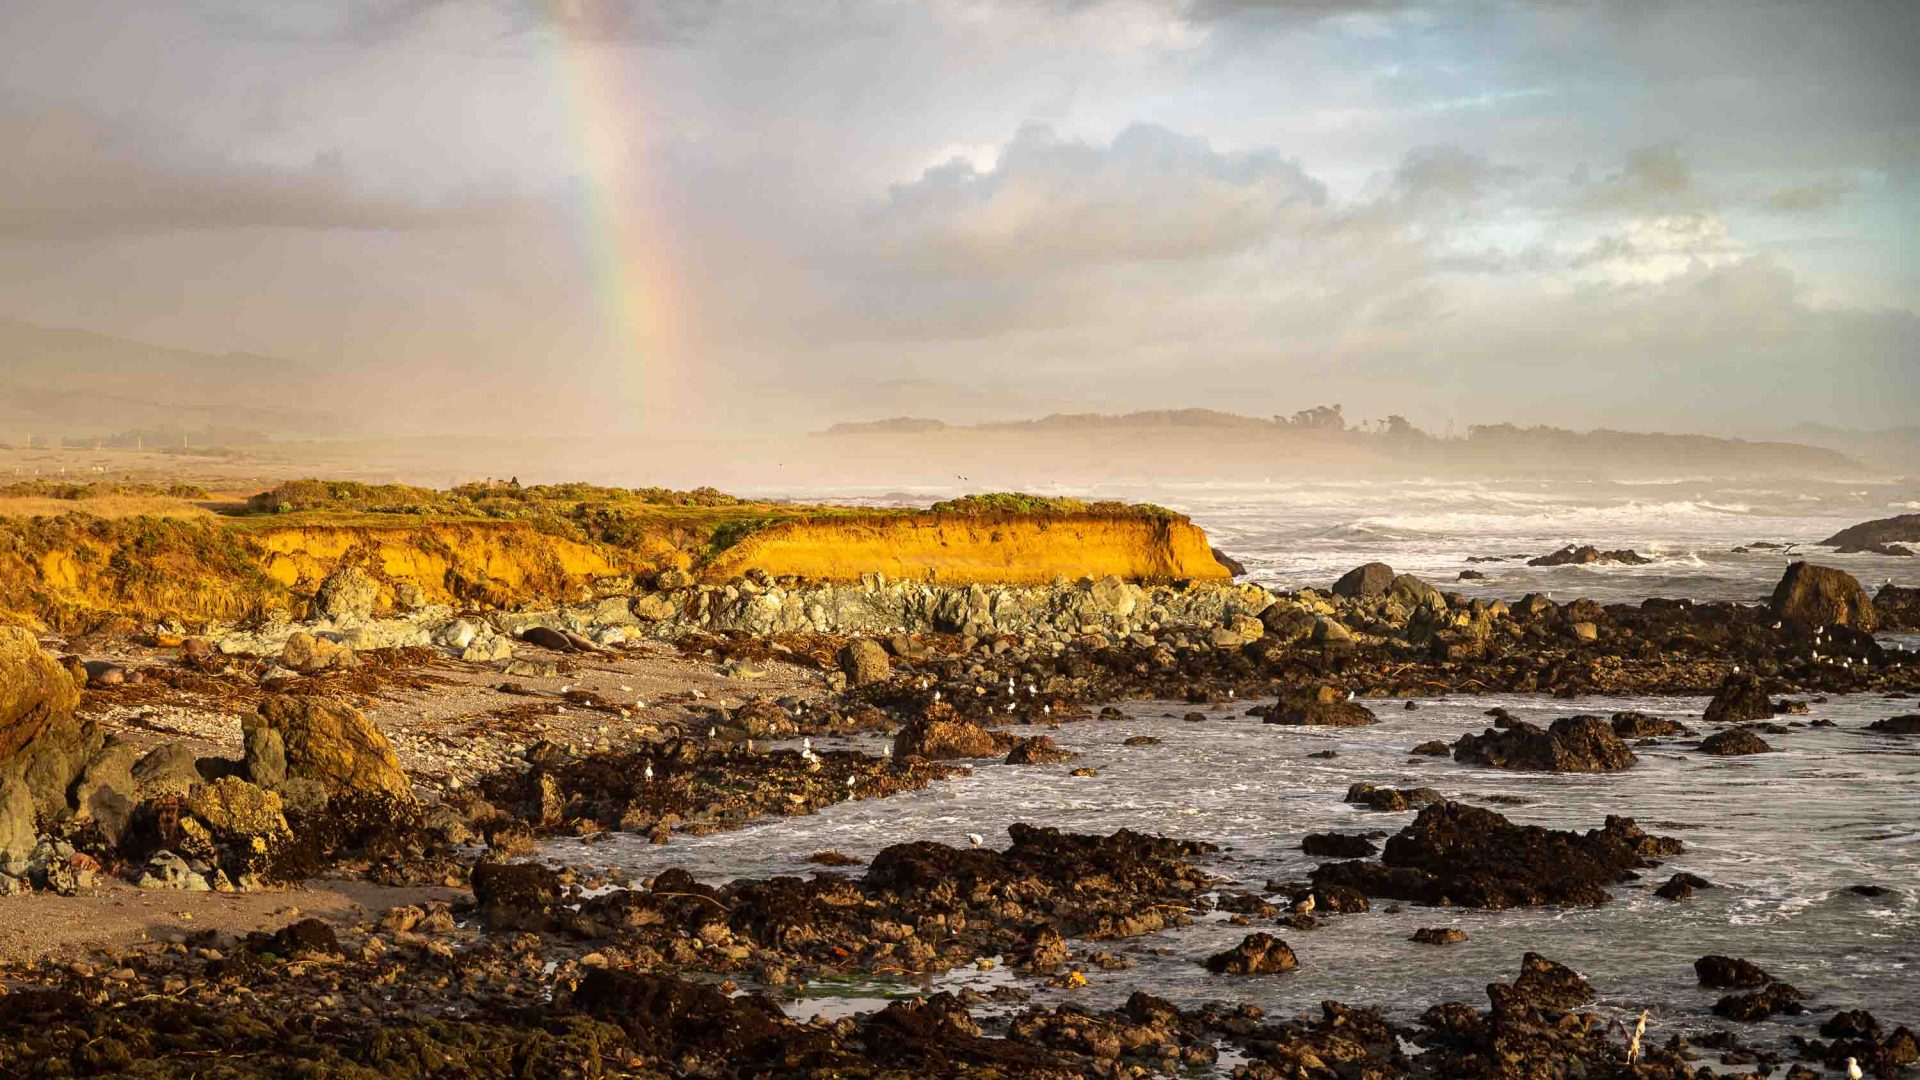 A rainbow comes down to the rocks and pools on the coast.